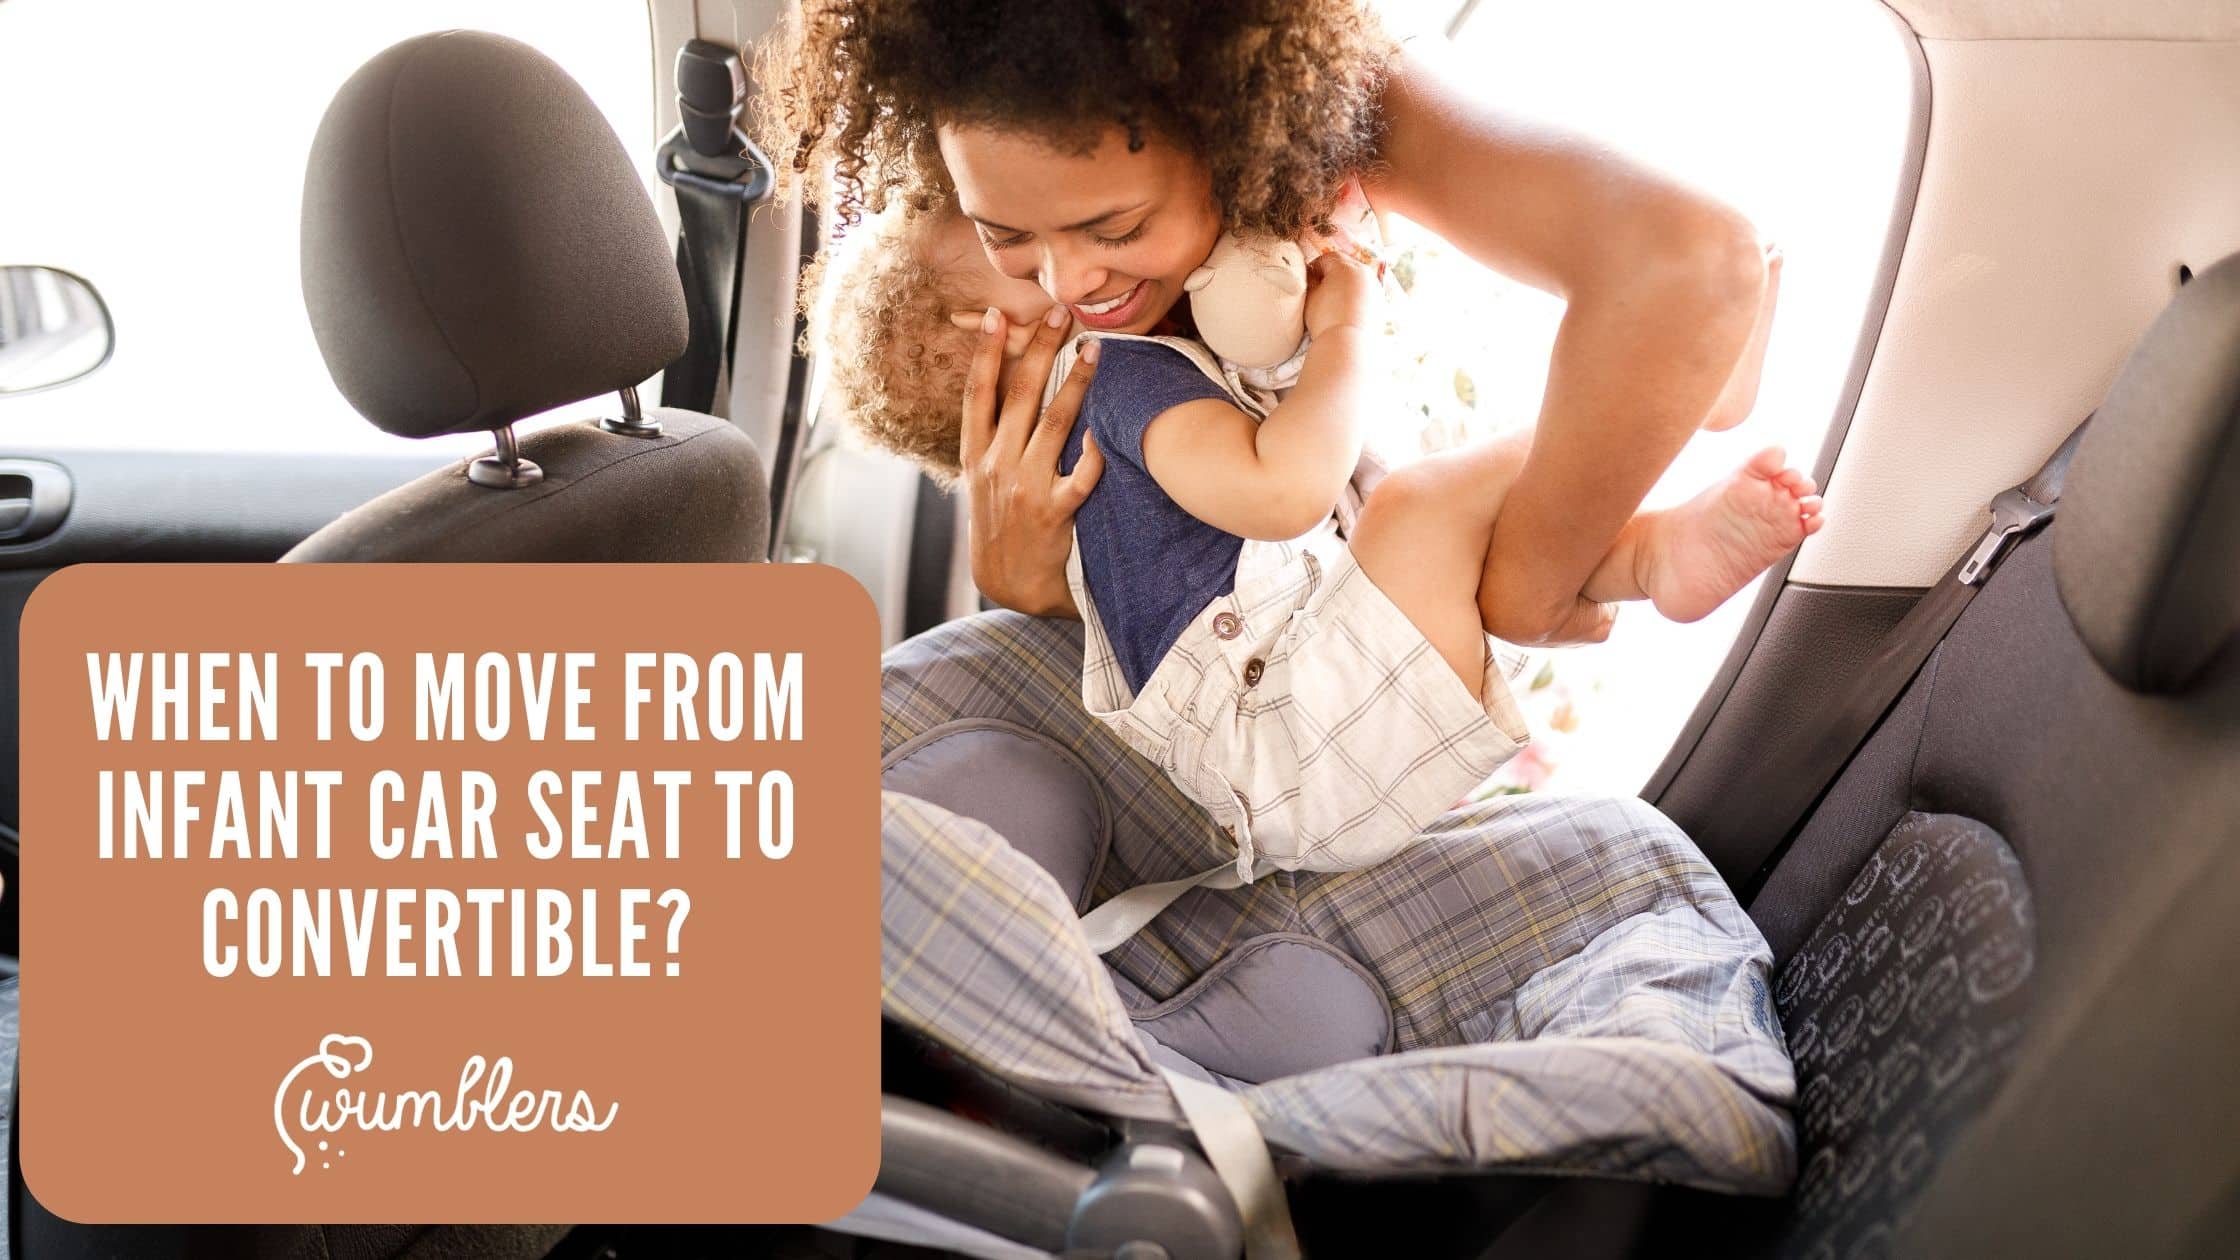 When to Move from Infant Car Seat to Convertible